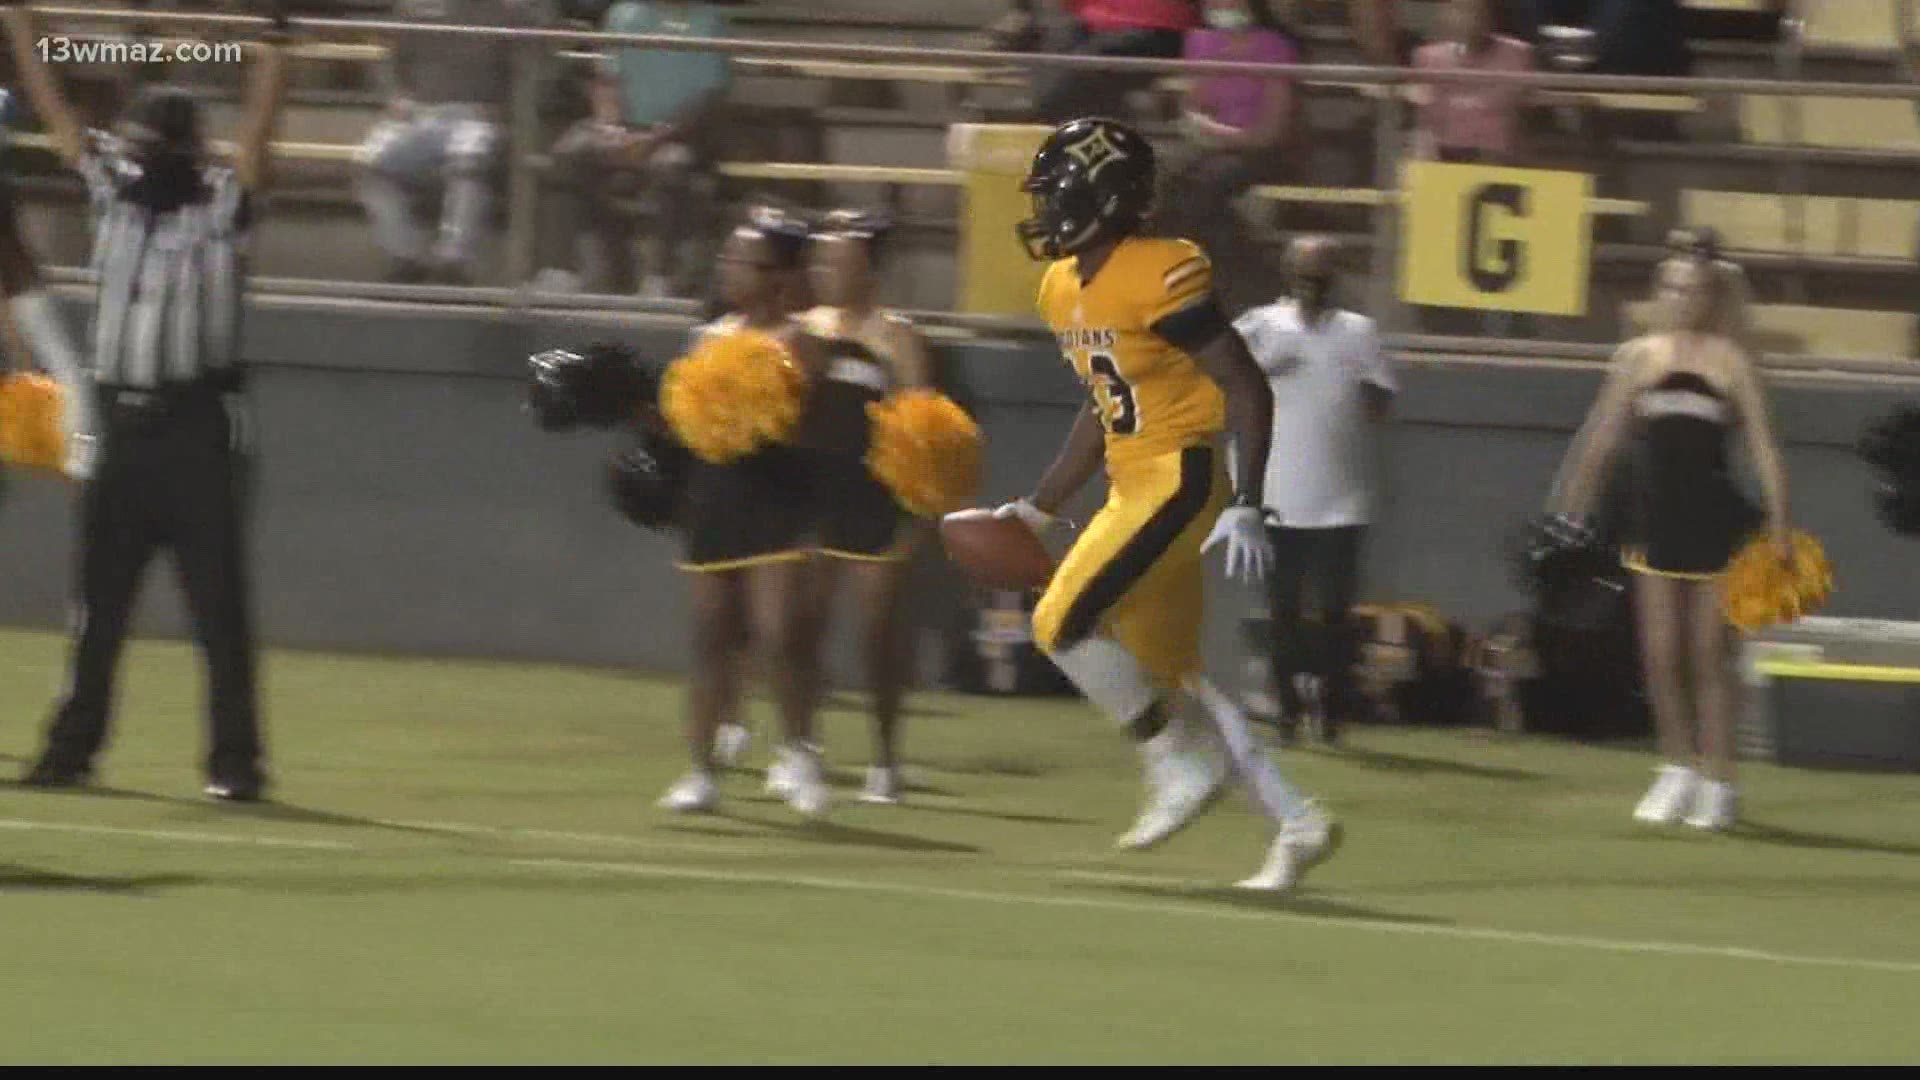 There's a big matchup brewing in high school football. Number 4 in 3A Peach County taking number 2 in 3A Crisp County.